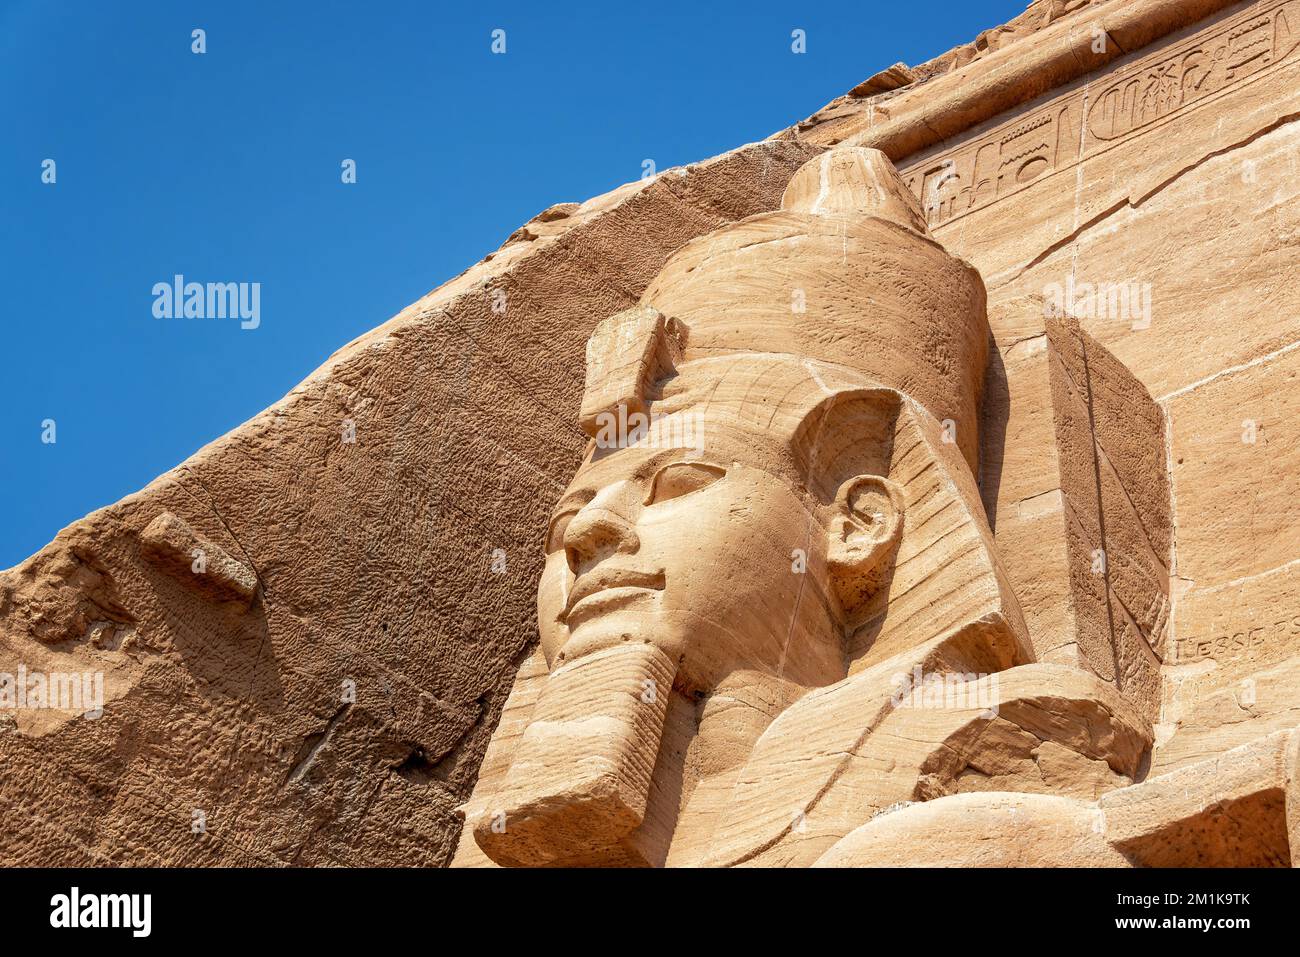 Closeup view of one of the statues at the temple of Abu Simbel in Egypt Stock Photo